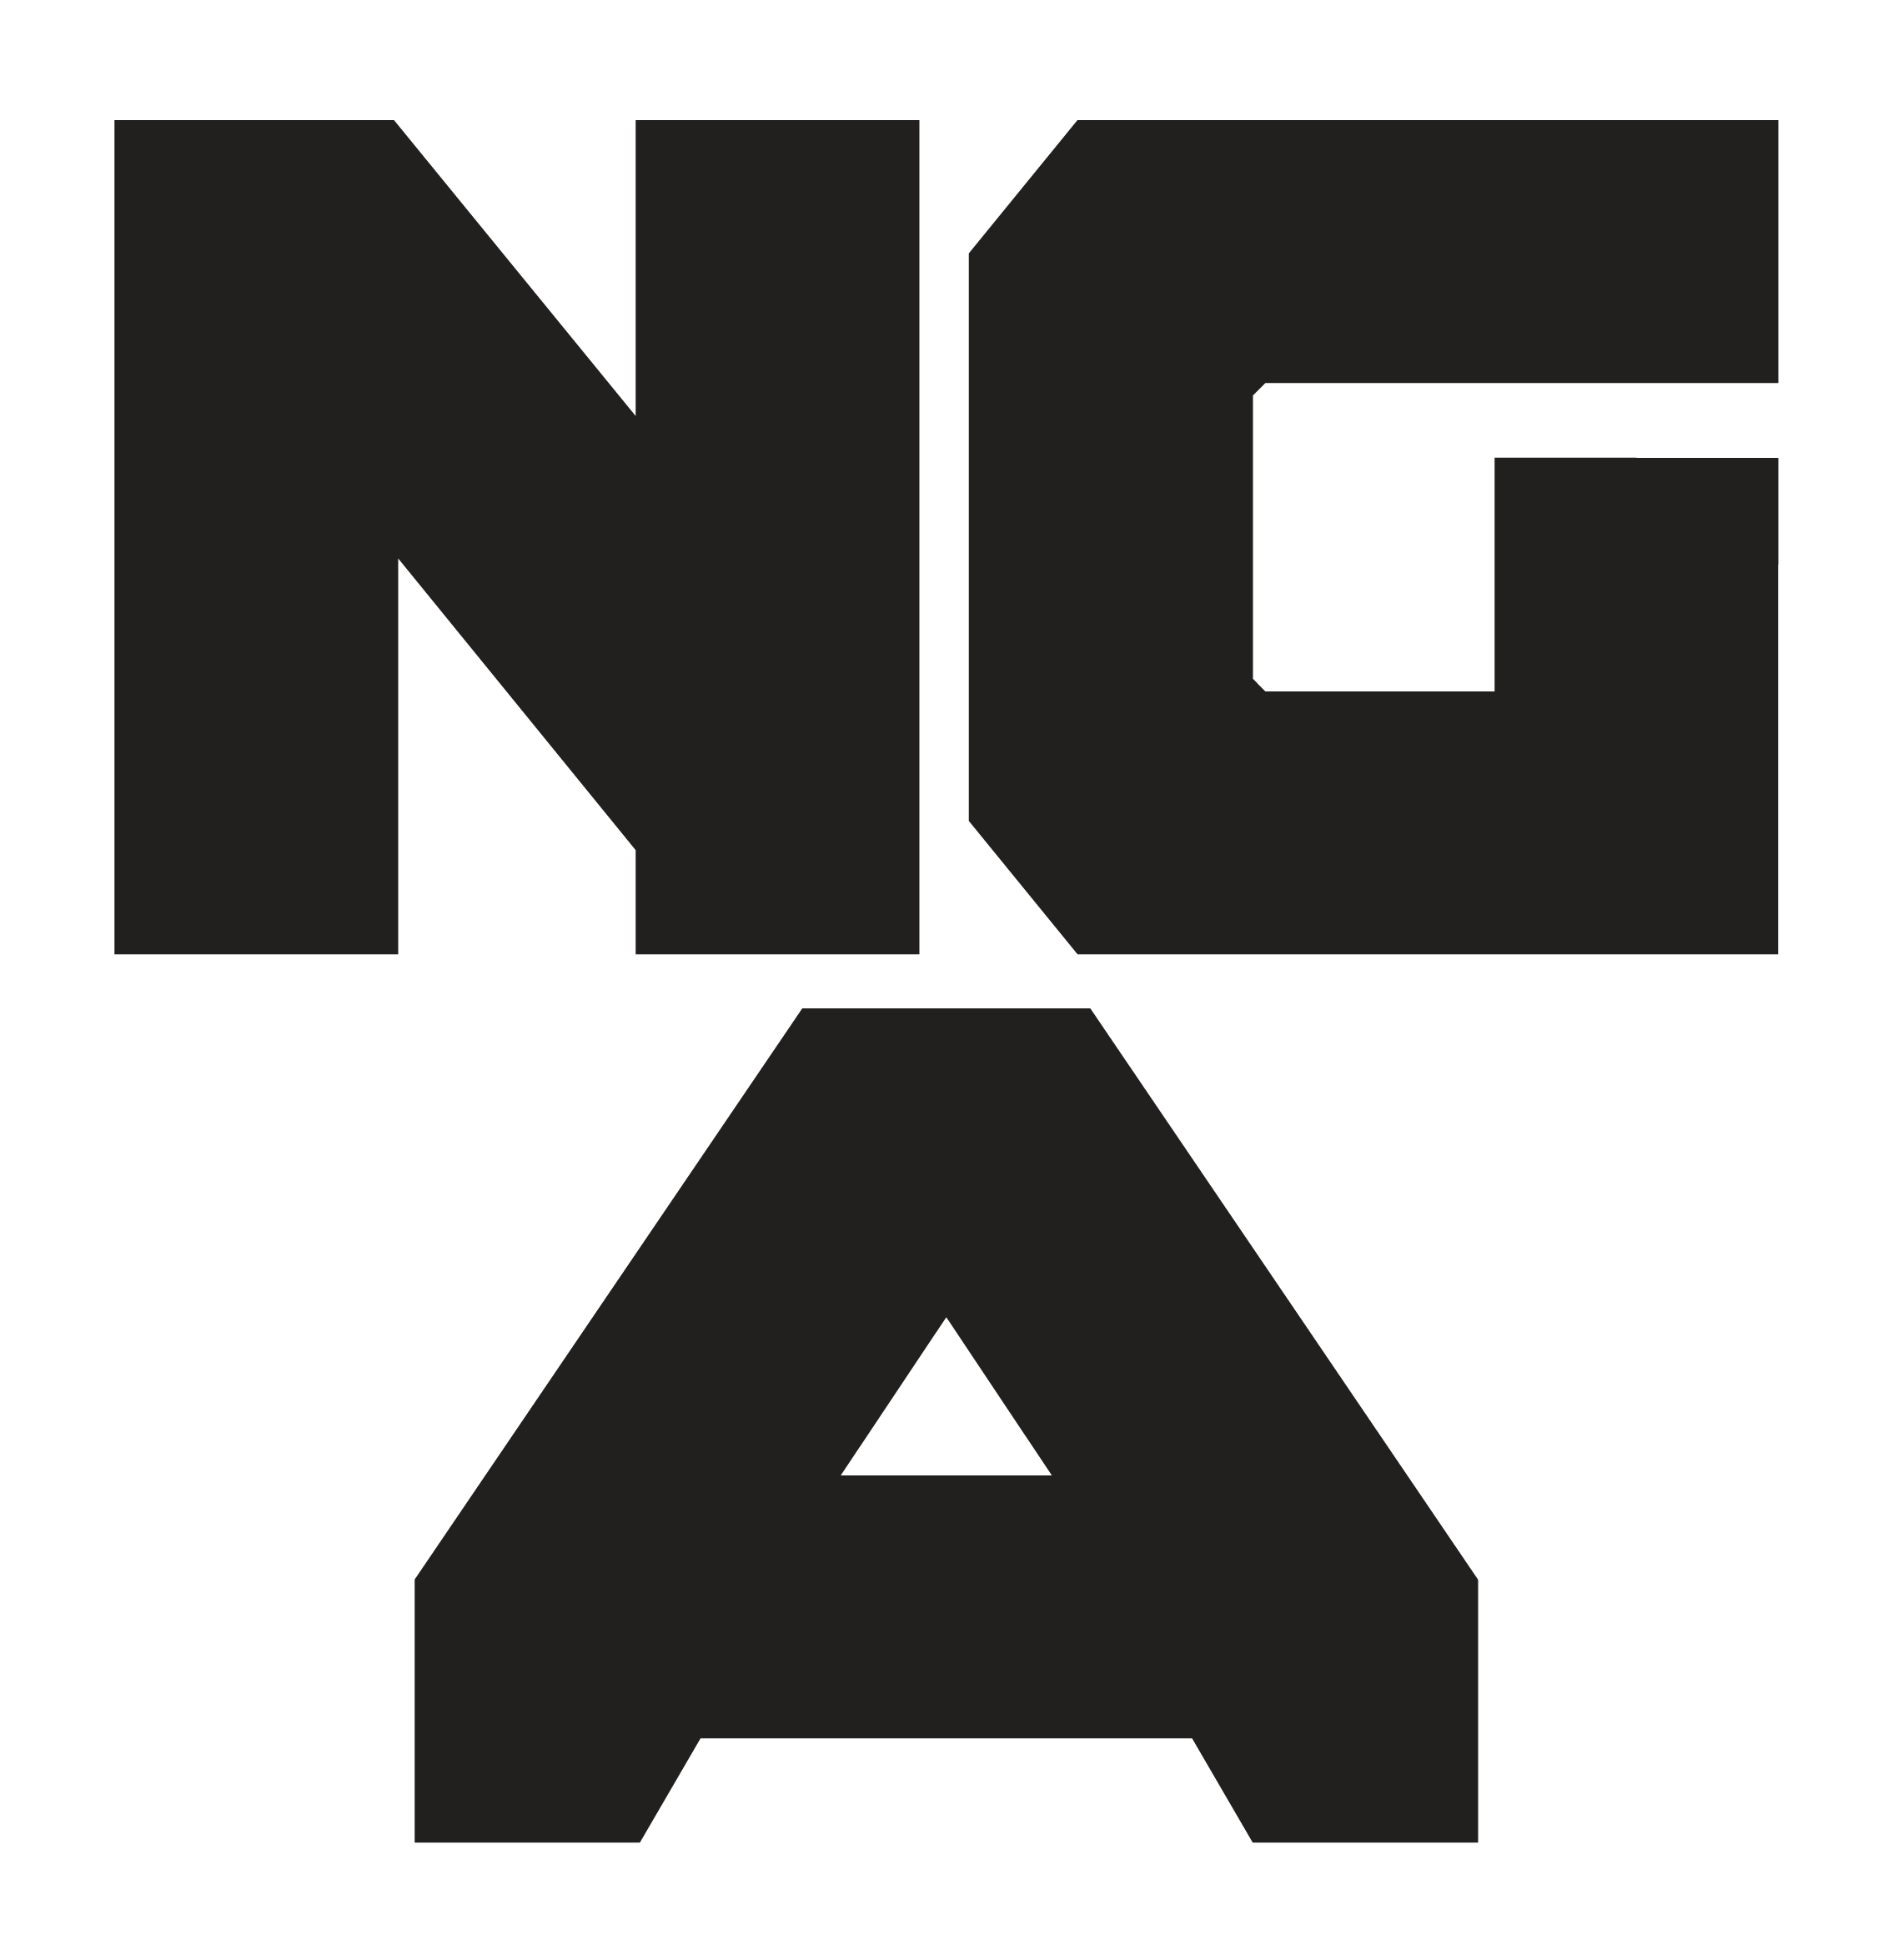 National Gallery of Australia logo This virtual workshop is co-developed and co-presented by the NPG and the NGA.